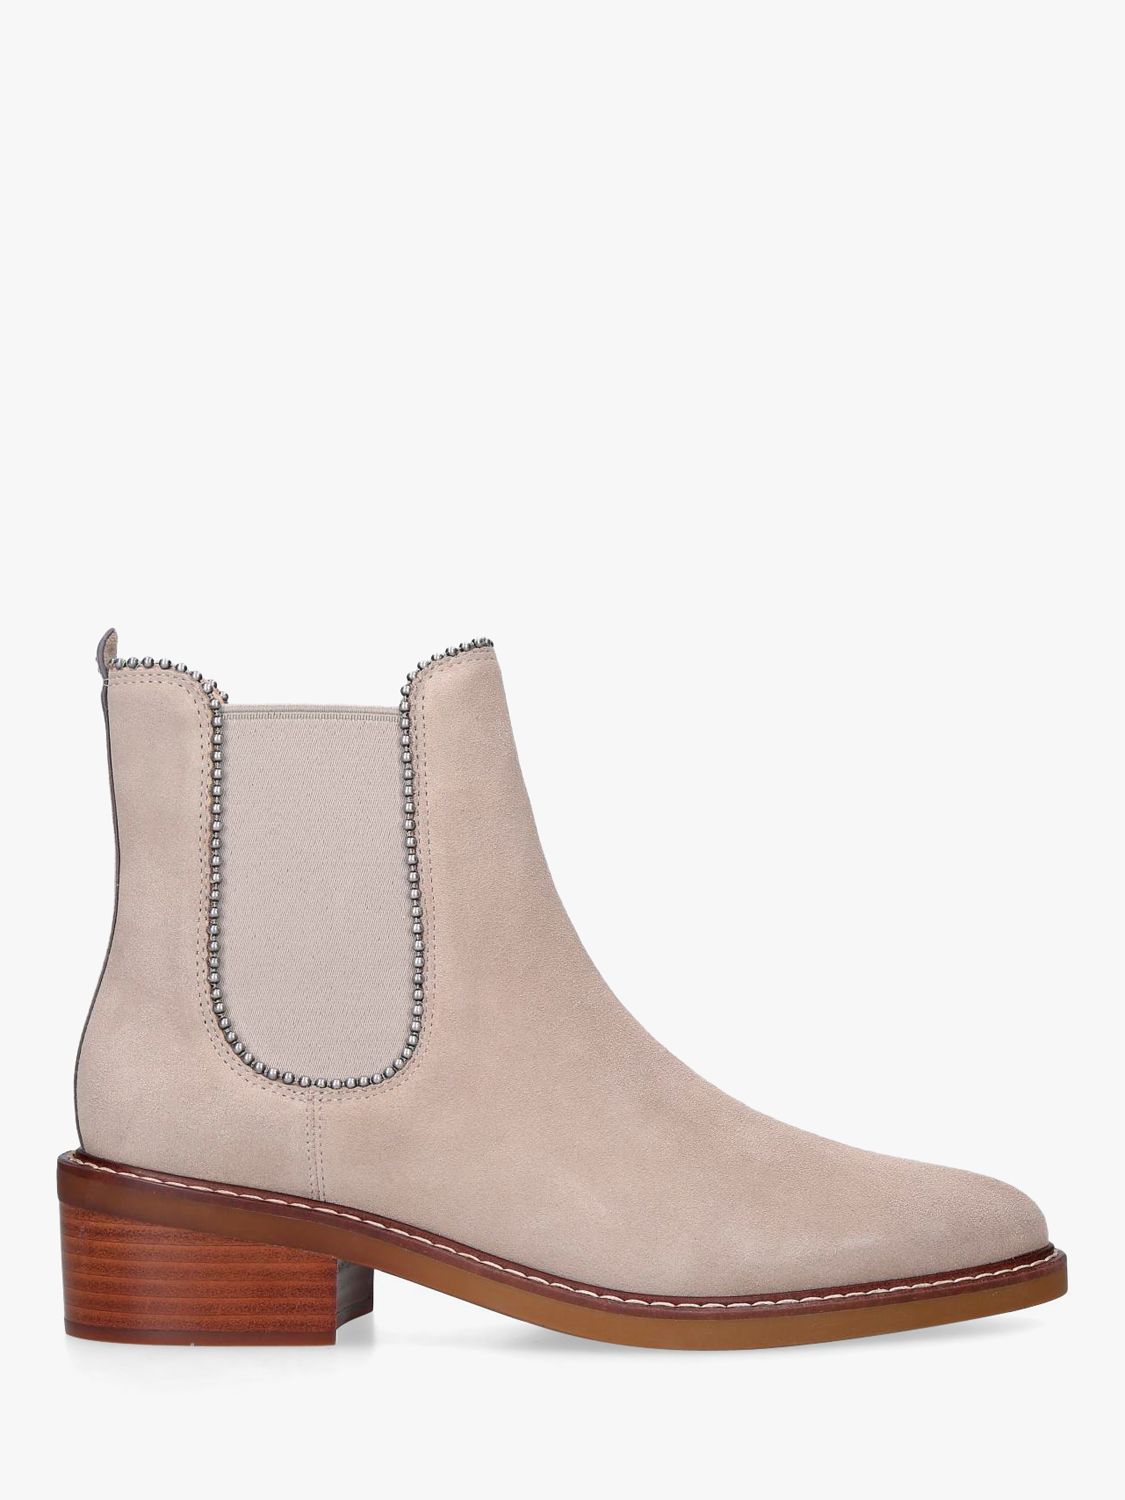 Coach Bowery Beadchain Suede Ankle Boots, Natural